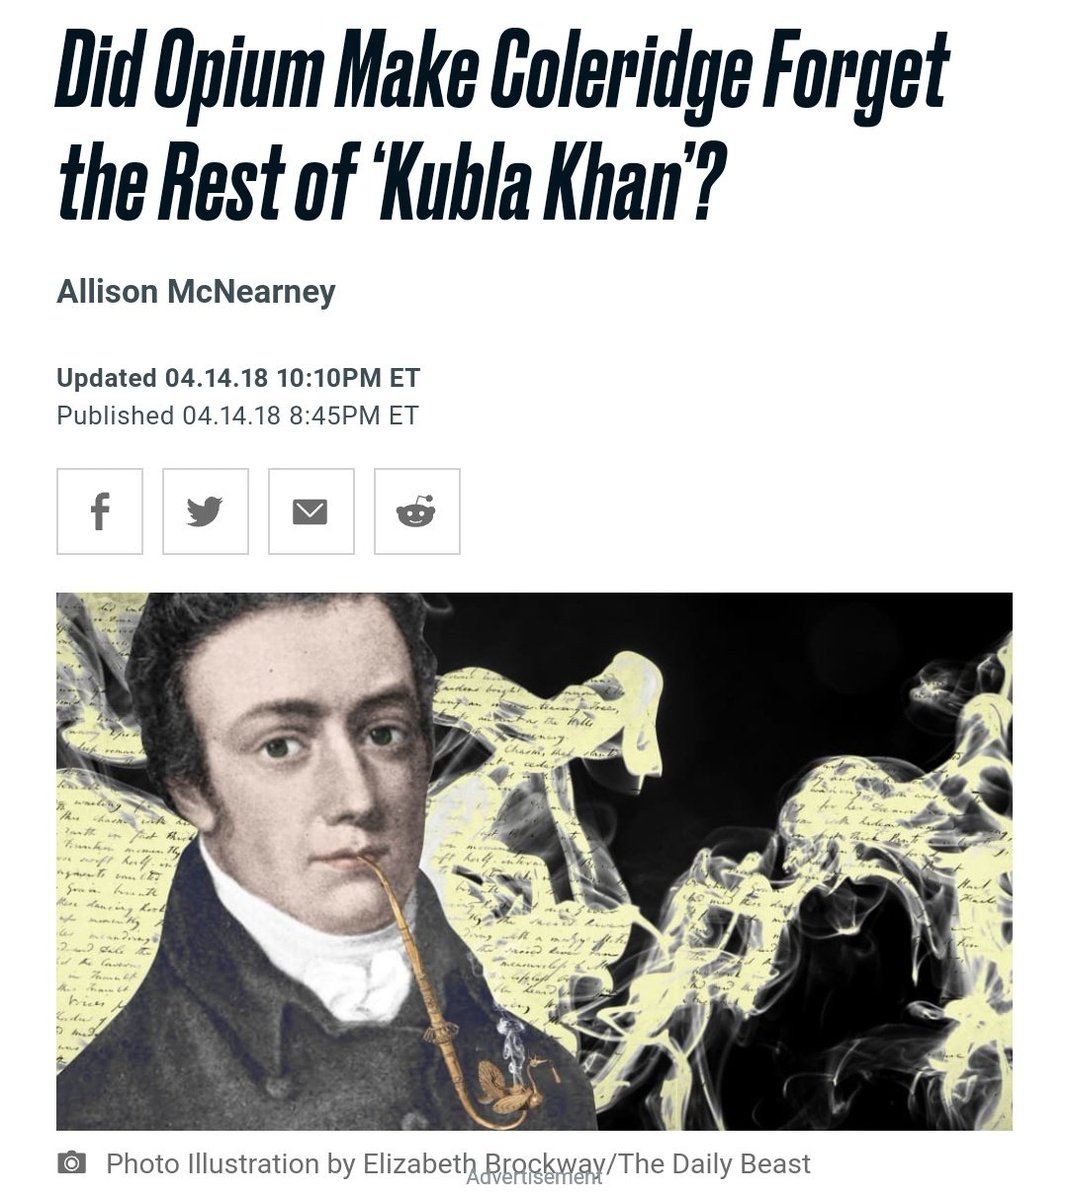 people: you over that Xanadu thing yet? me: oh yes, I've long moved on by nowmy earphones:     Kubla Khan by Samuel Taylor COLERIDGE read by Various | Full Audio Book21:34 ━━━❍──────55:36      ↻   ⊲ Ⅱ ⊳   ↺ volume: ▁▂▃▄▅▆▇ 100%